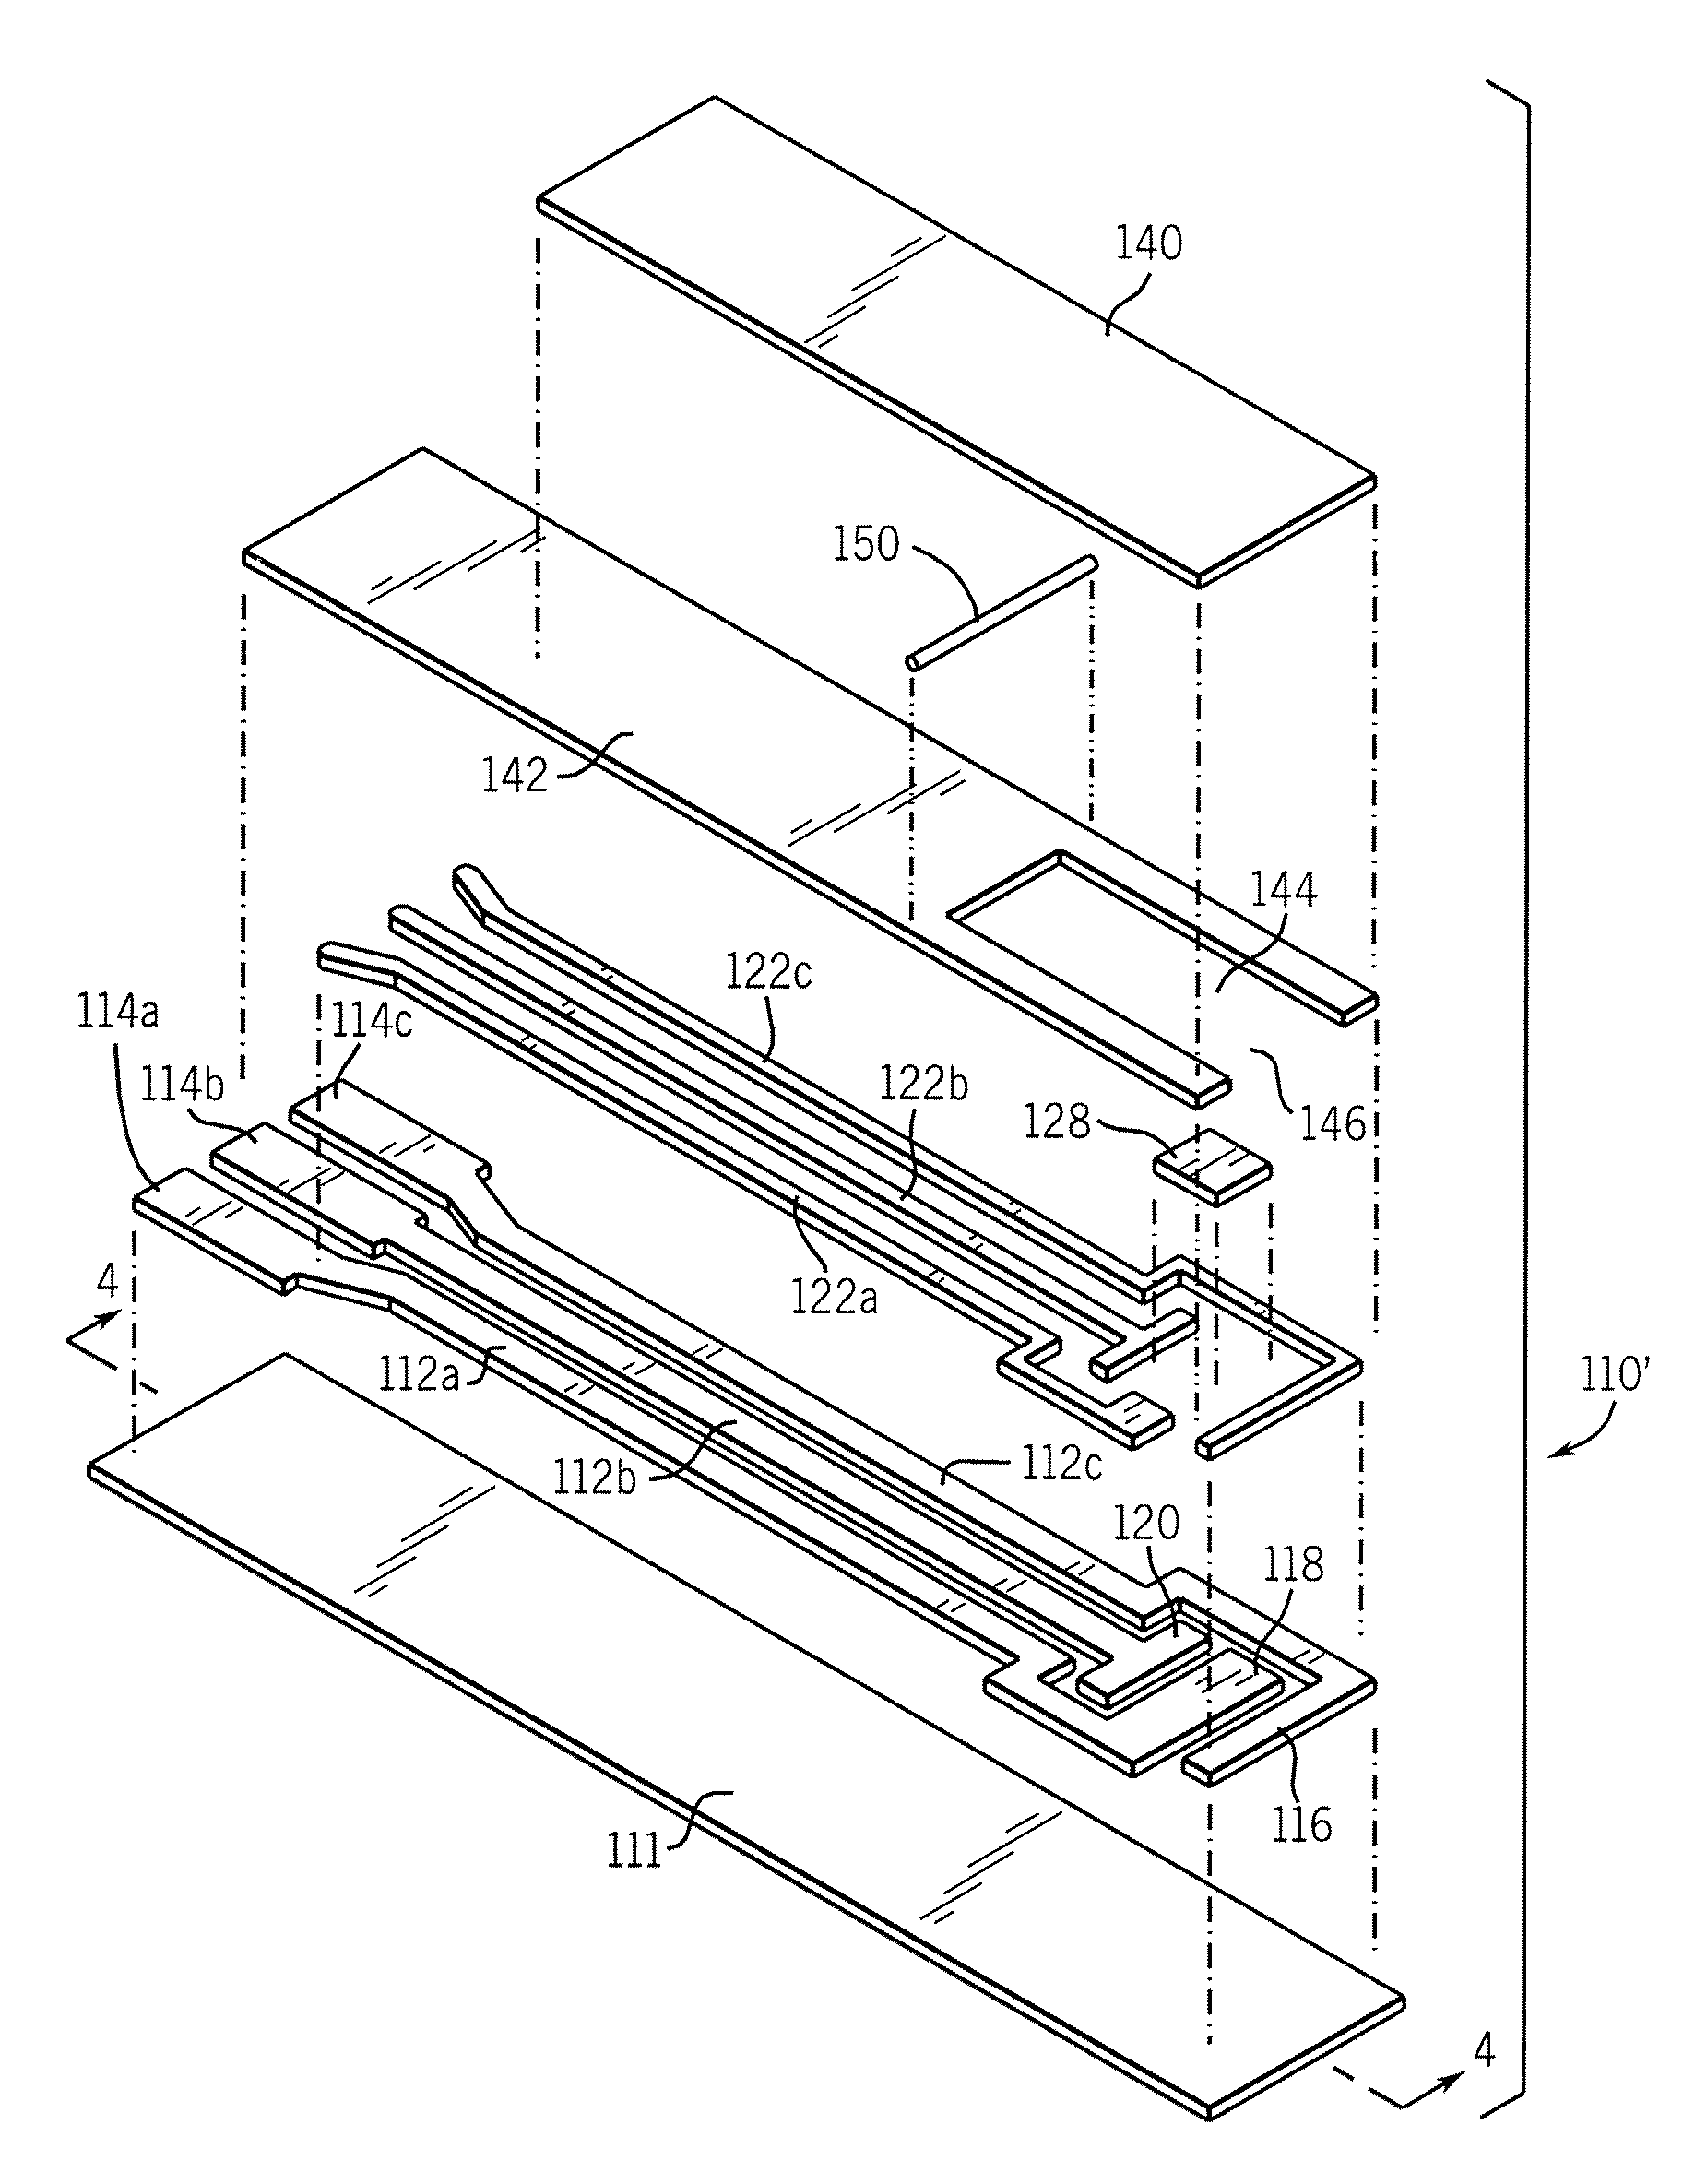 Biosensors and methods of using the same